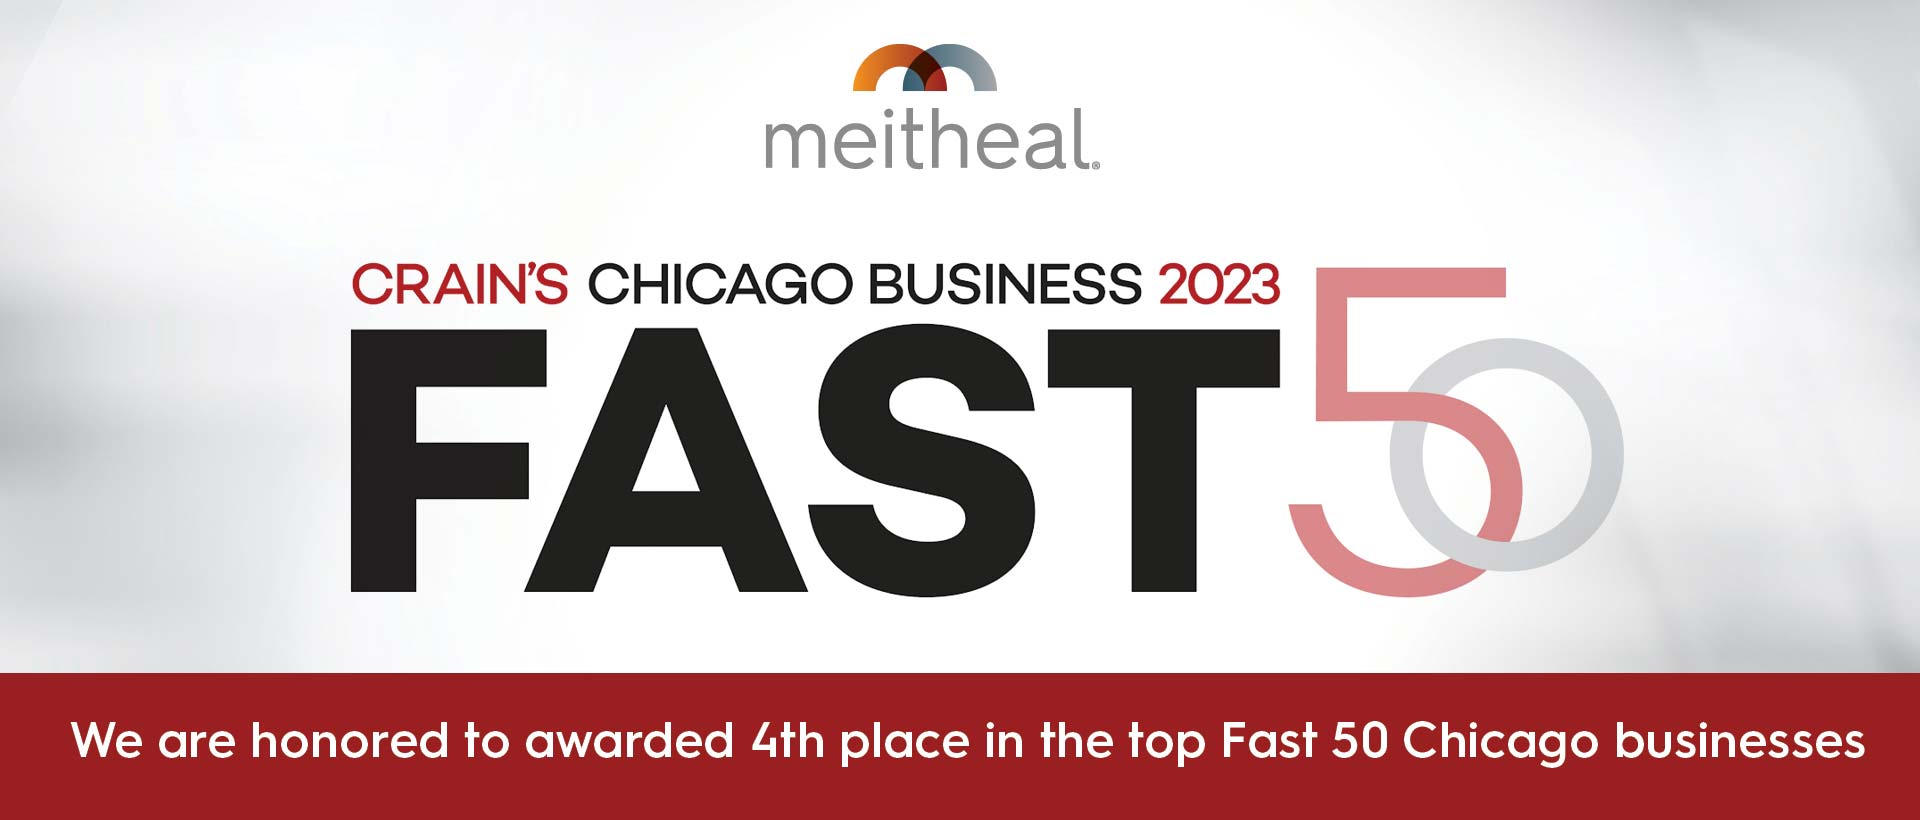 Meitheal is Ranked #4 on Crain’s 2023 Fast 50 in Chicago